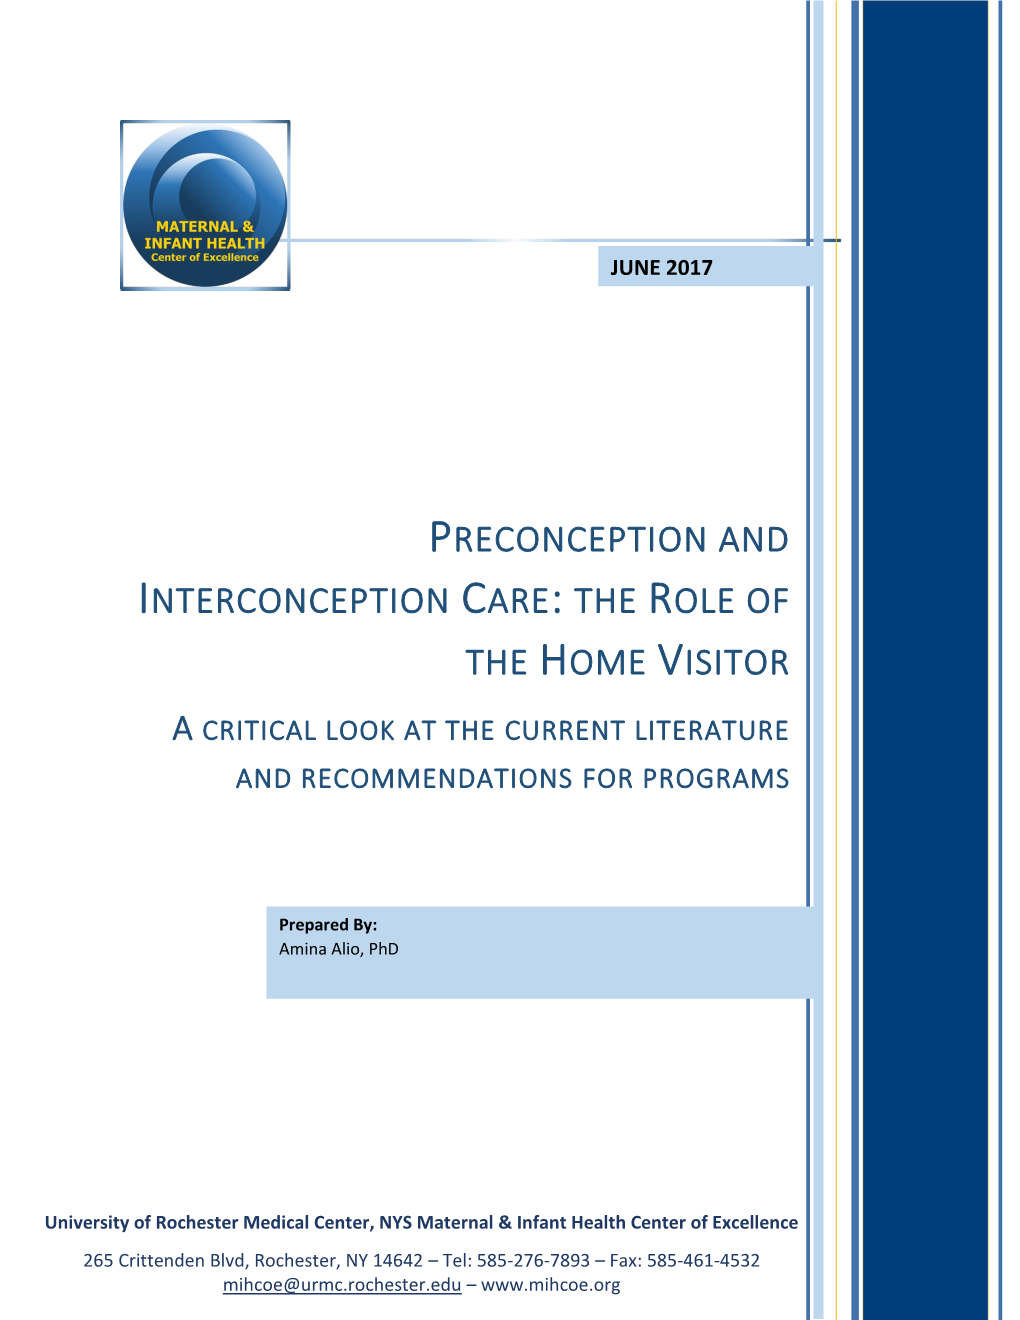 Preconception and Interconception Care: the Role of the Home Visitor